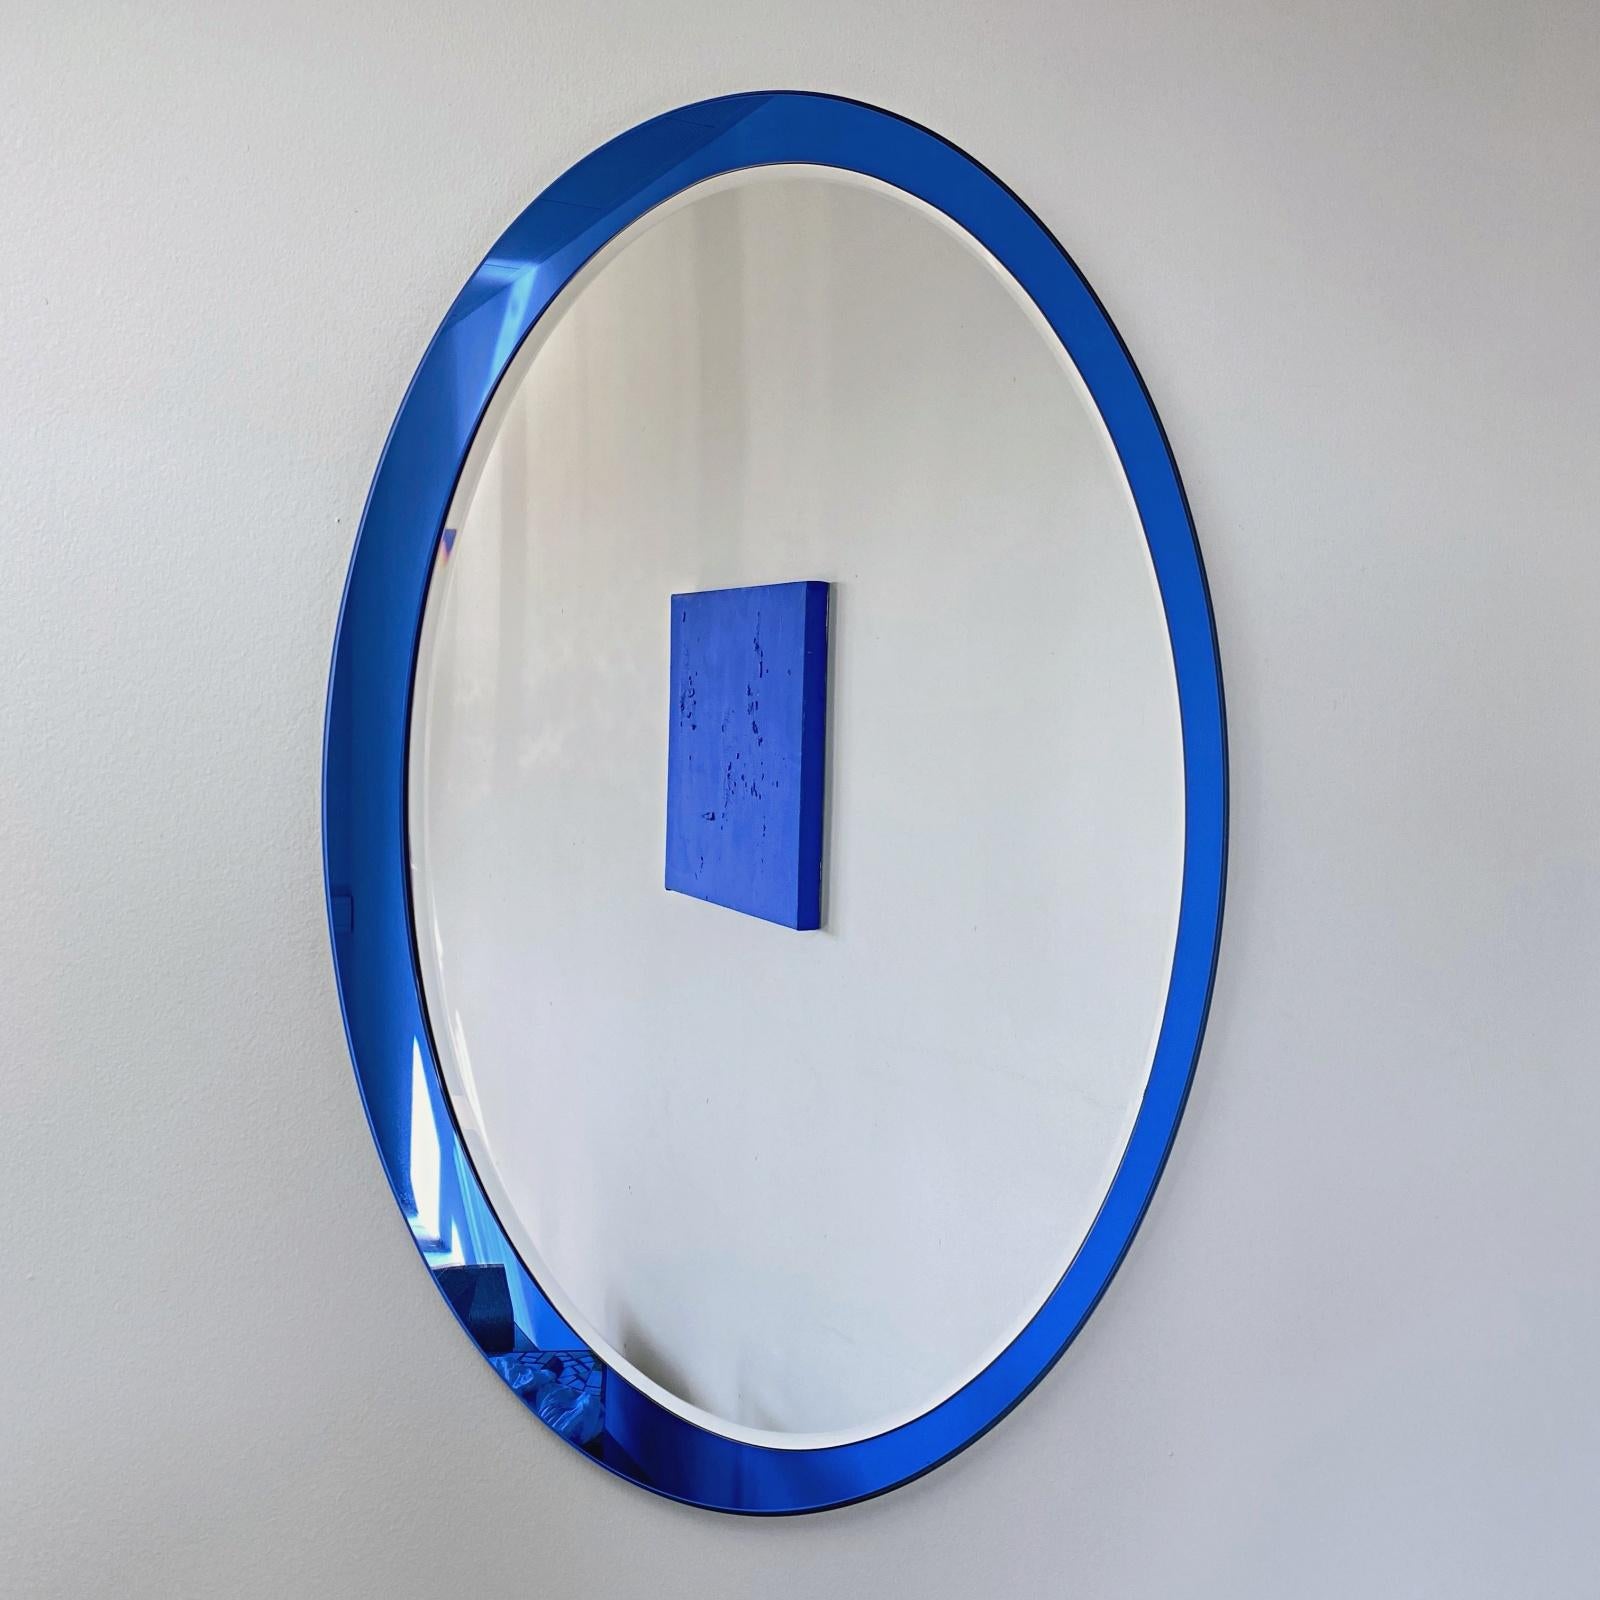 Mid-Century Modern Large Midcentury Fontana Arte Labeled Blue Edged Oval Wall Mirror, 1960s, Italy